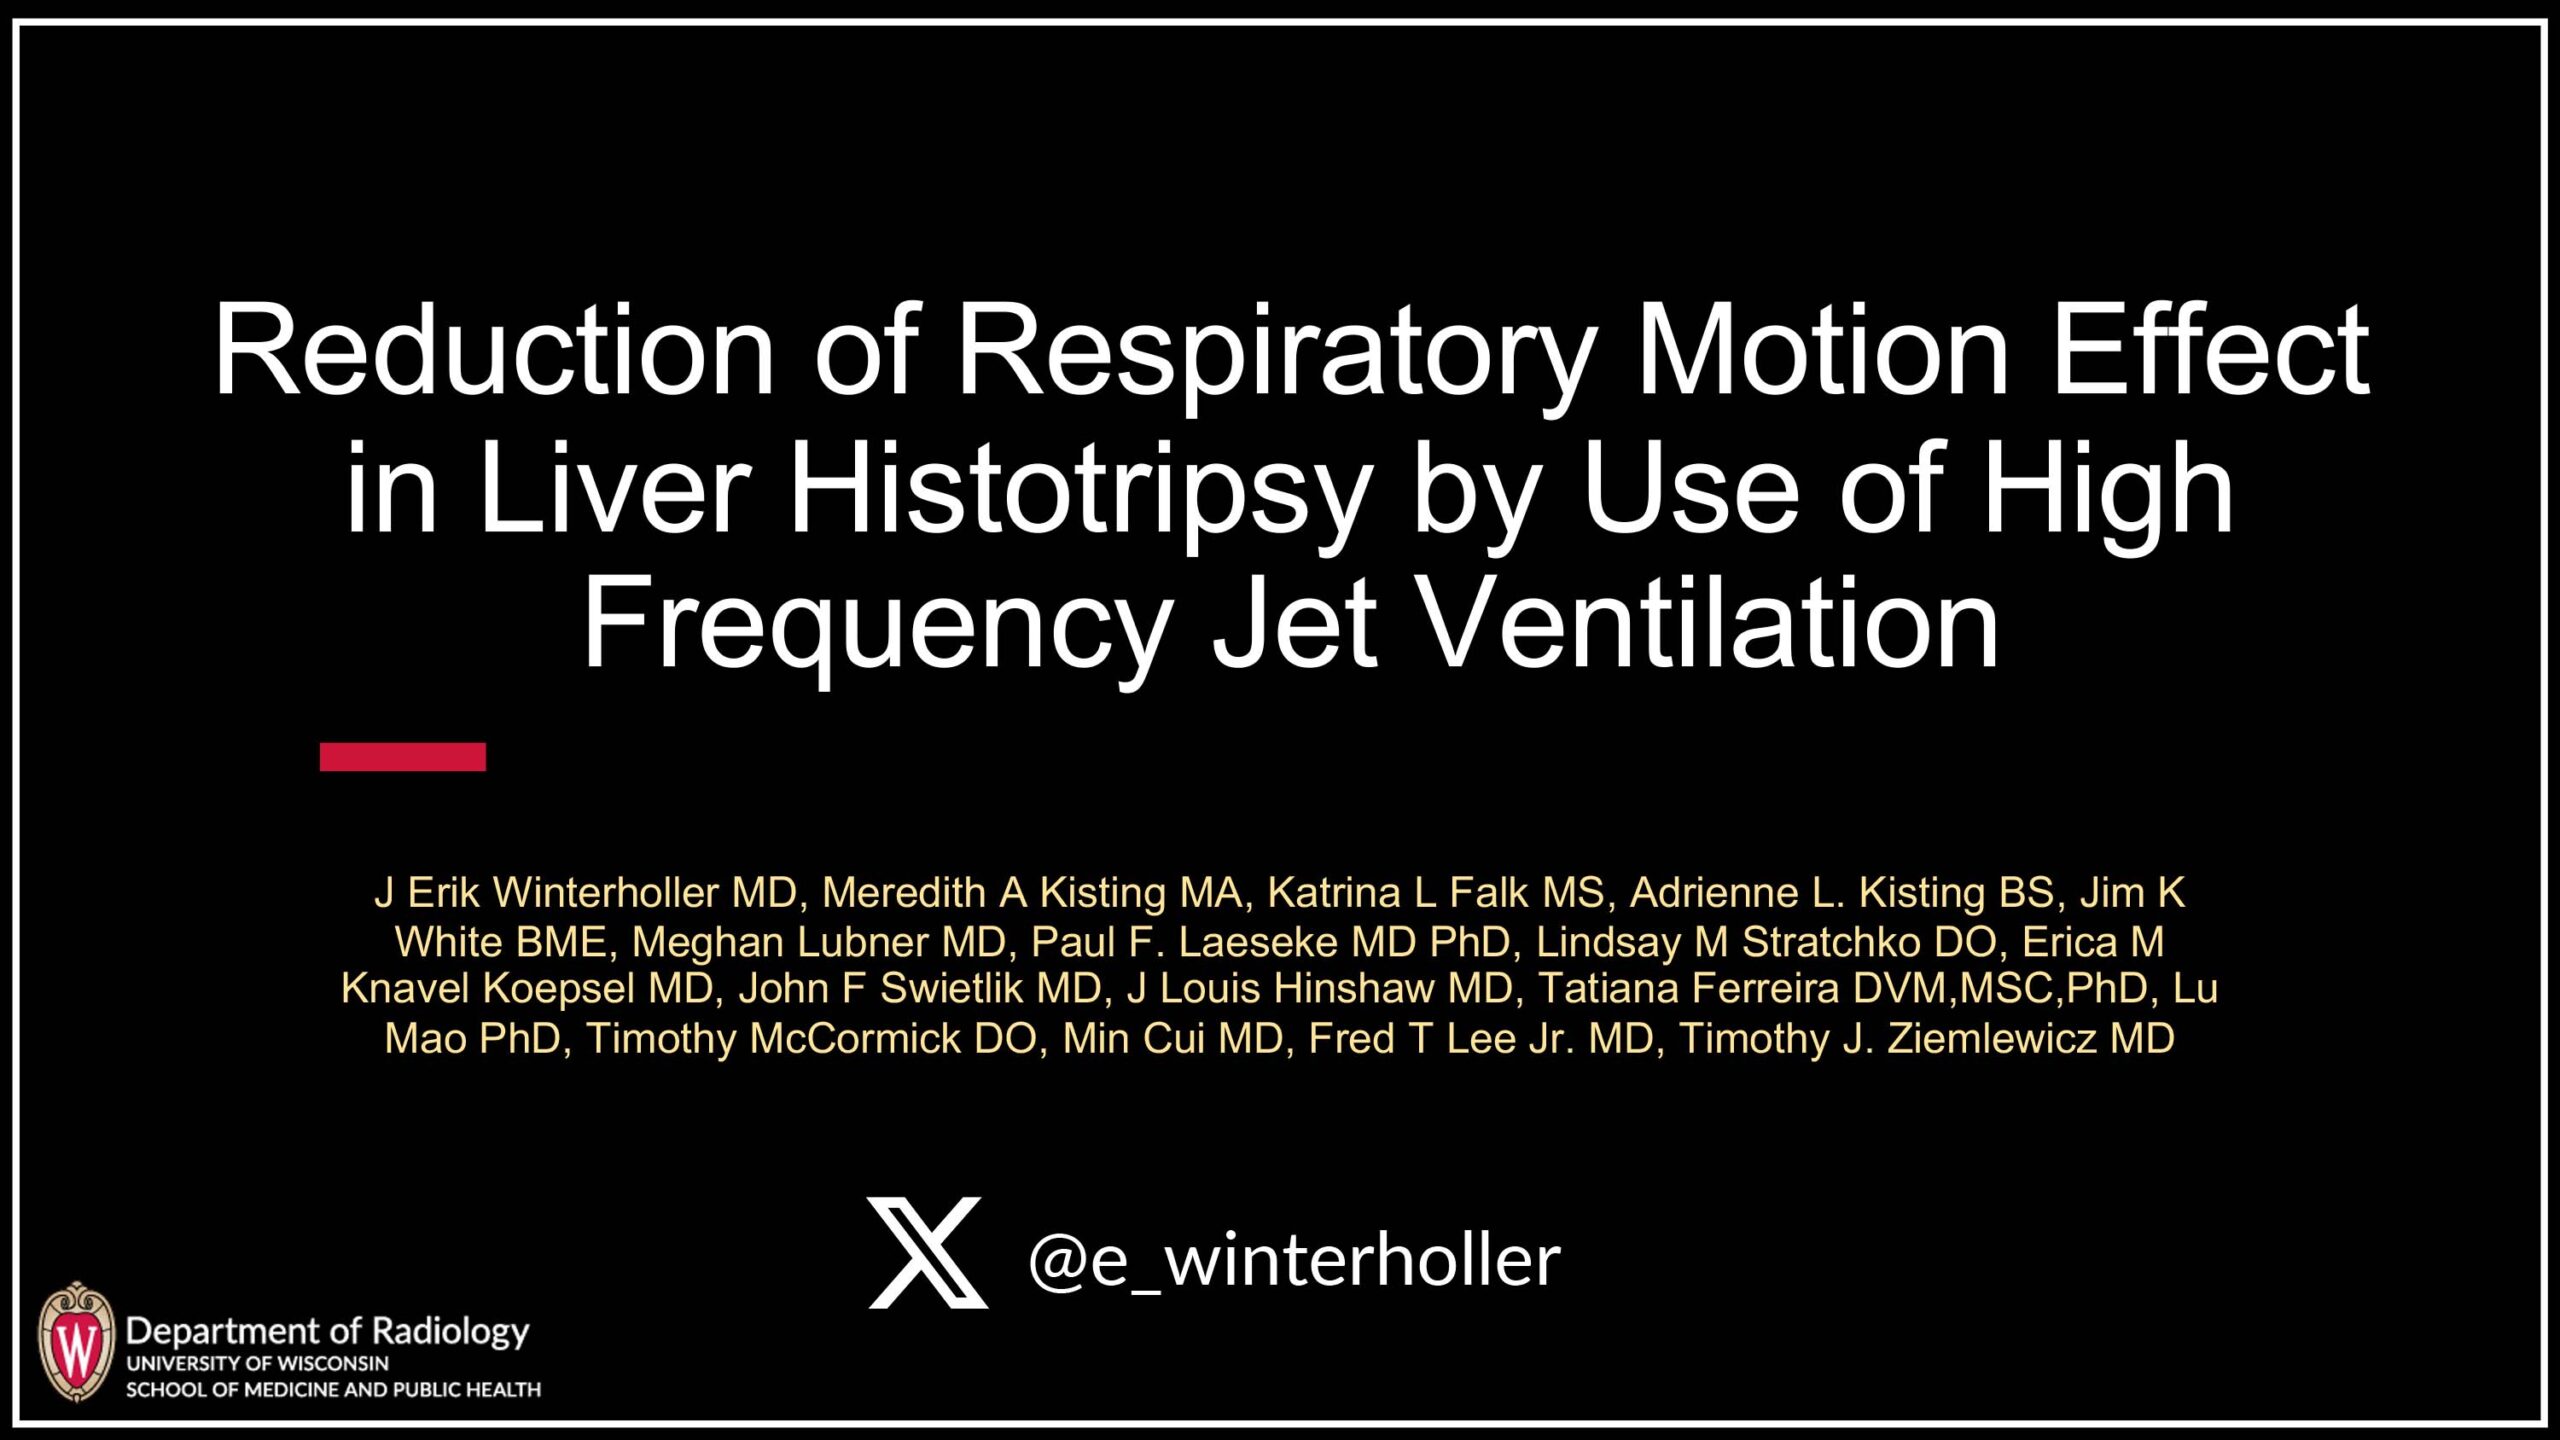 Reduction of Respiratory Motion Effect on Histotripsy Treatment Zones Using High Frequency Jet Ventilation